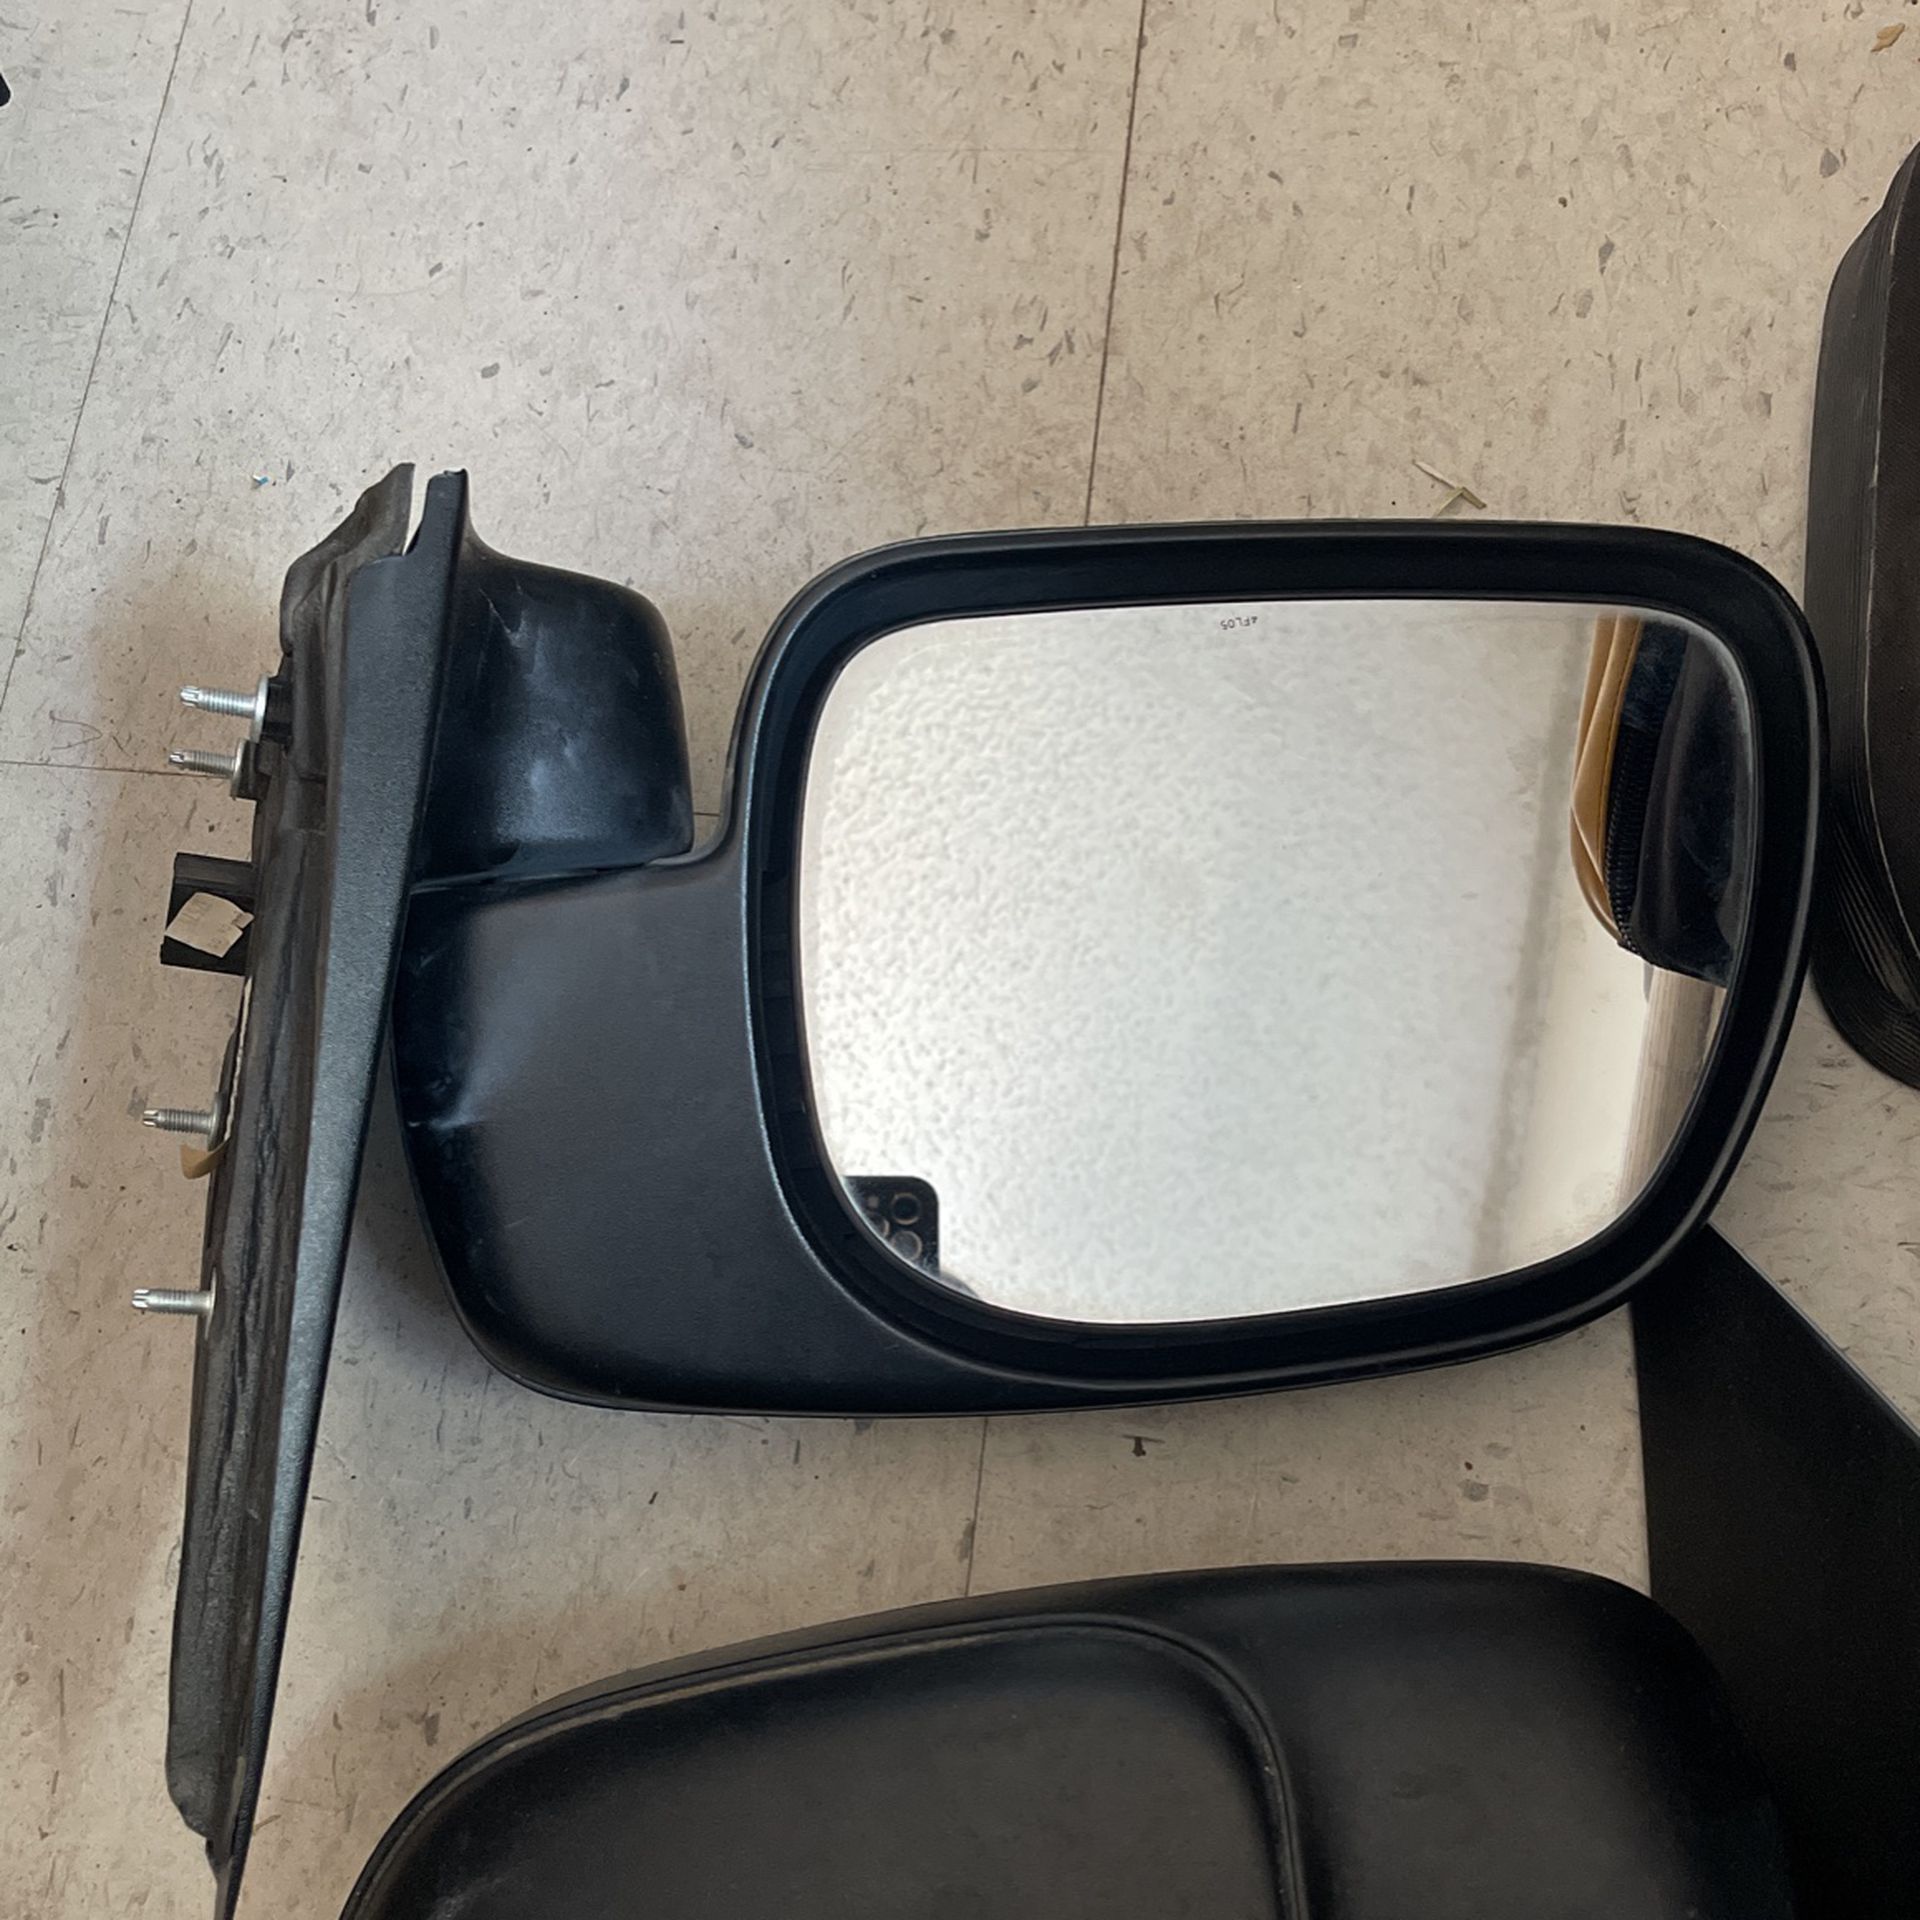 1(contact info removed) F-250 Mirrors 